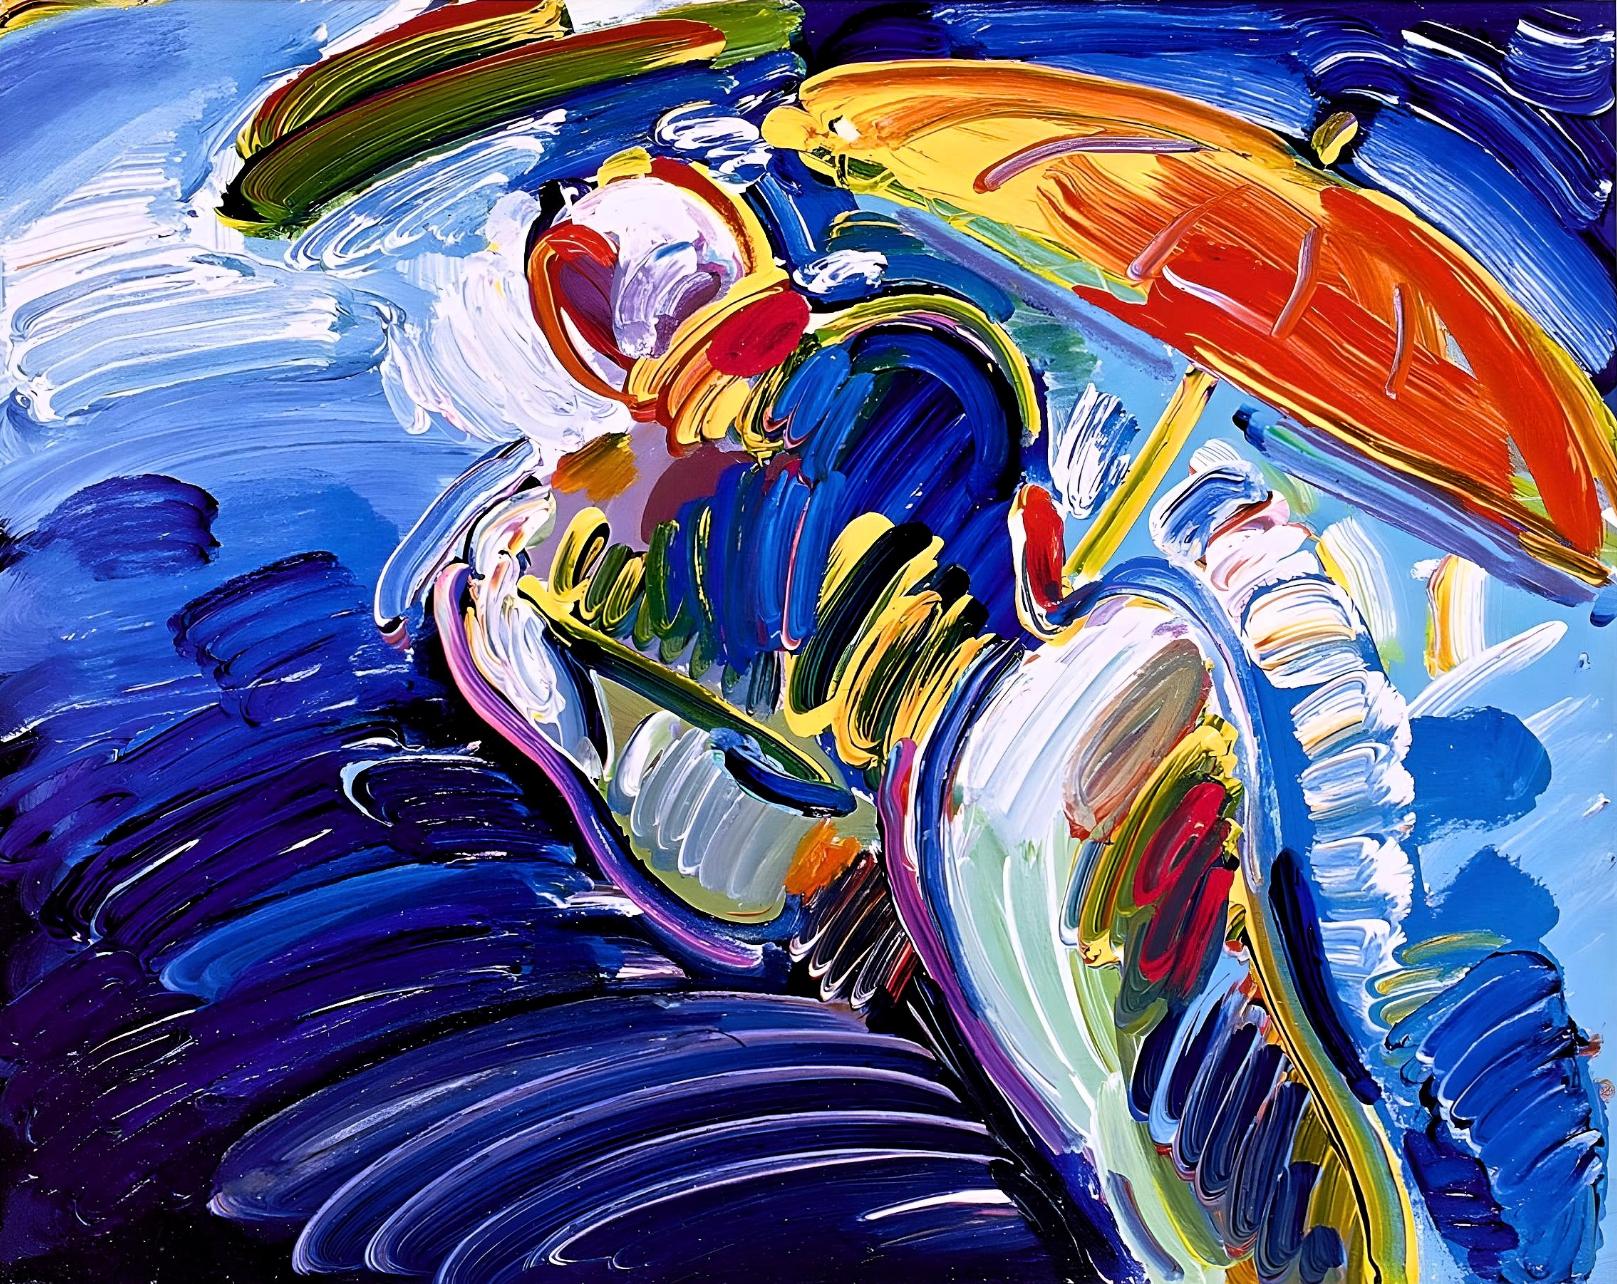 Artist: Peter Max (1937)
Title: Abstract Figure With Umbrella
Year: 2001
Edition: 500/500, plus proofs
Medium: Lithograph on archival paper
Size: 9 x 11 inches
Condition: Excellent
Inscription: Signed and numbered by the artist.
Notes: Published by